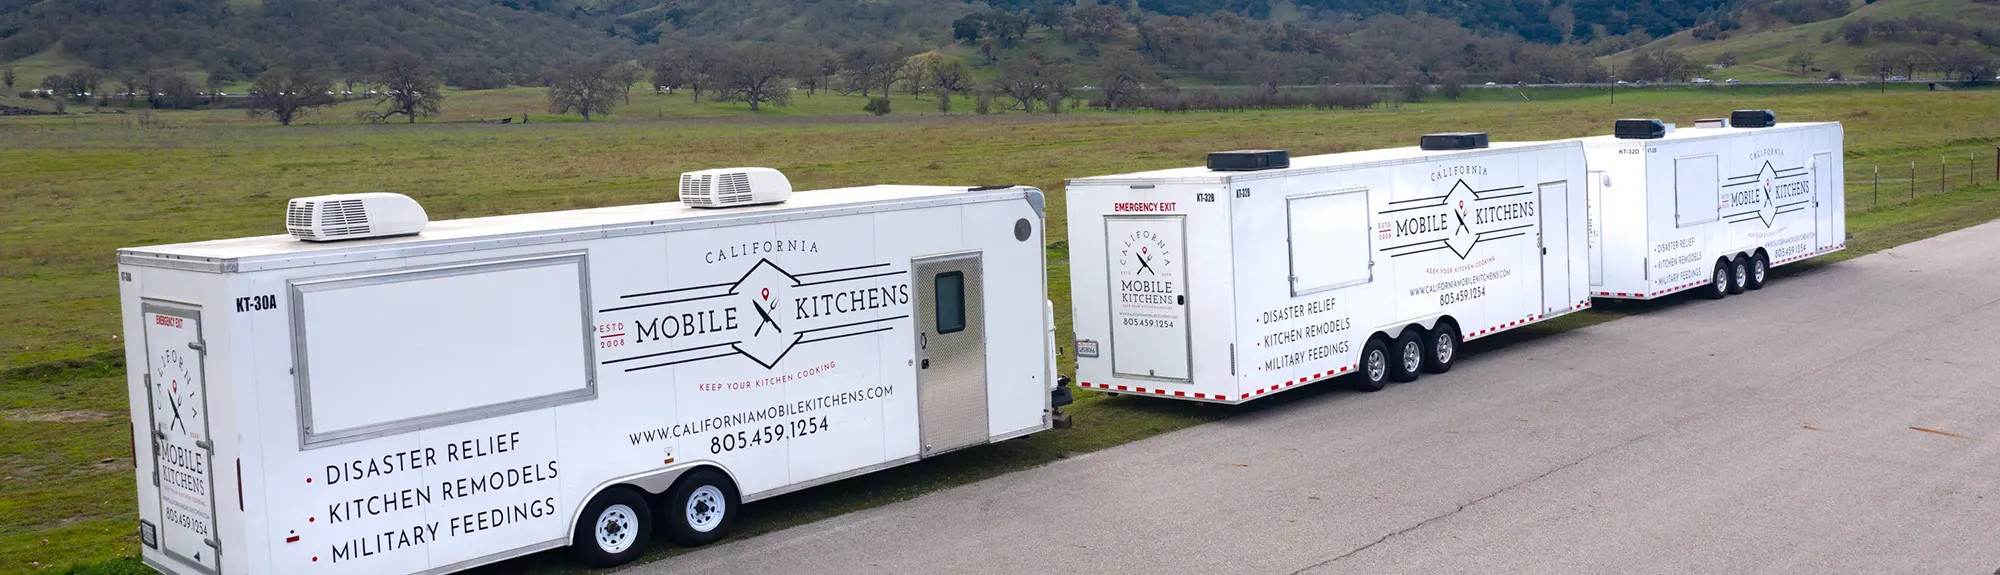 The role of mobile kitchens in emergency response